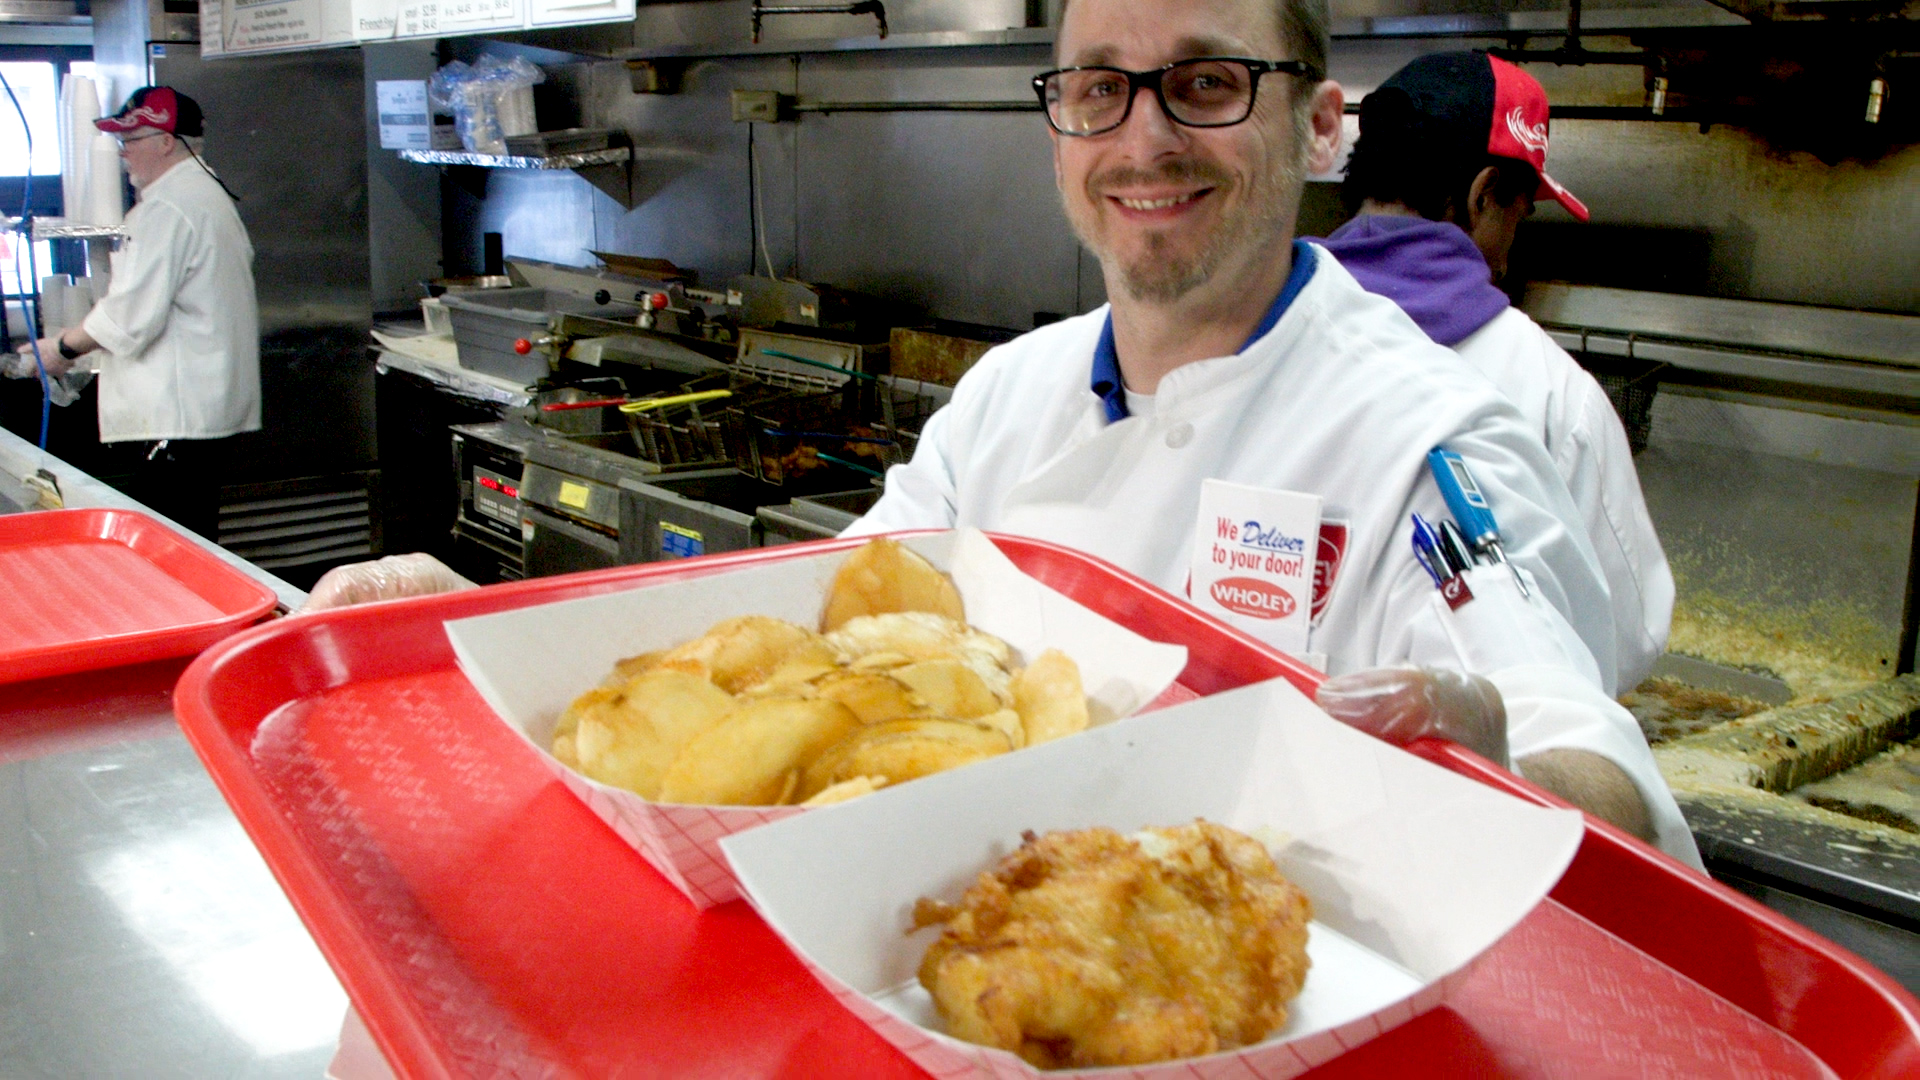 A photo of a worker serving fish and chips at Wholey's.